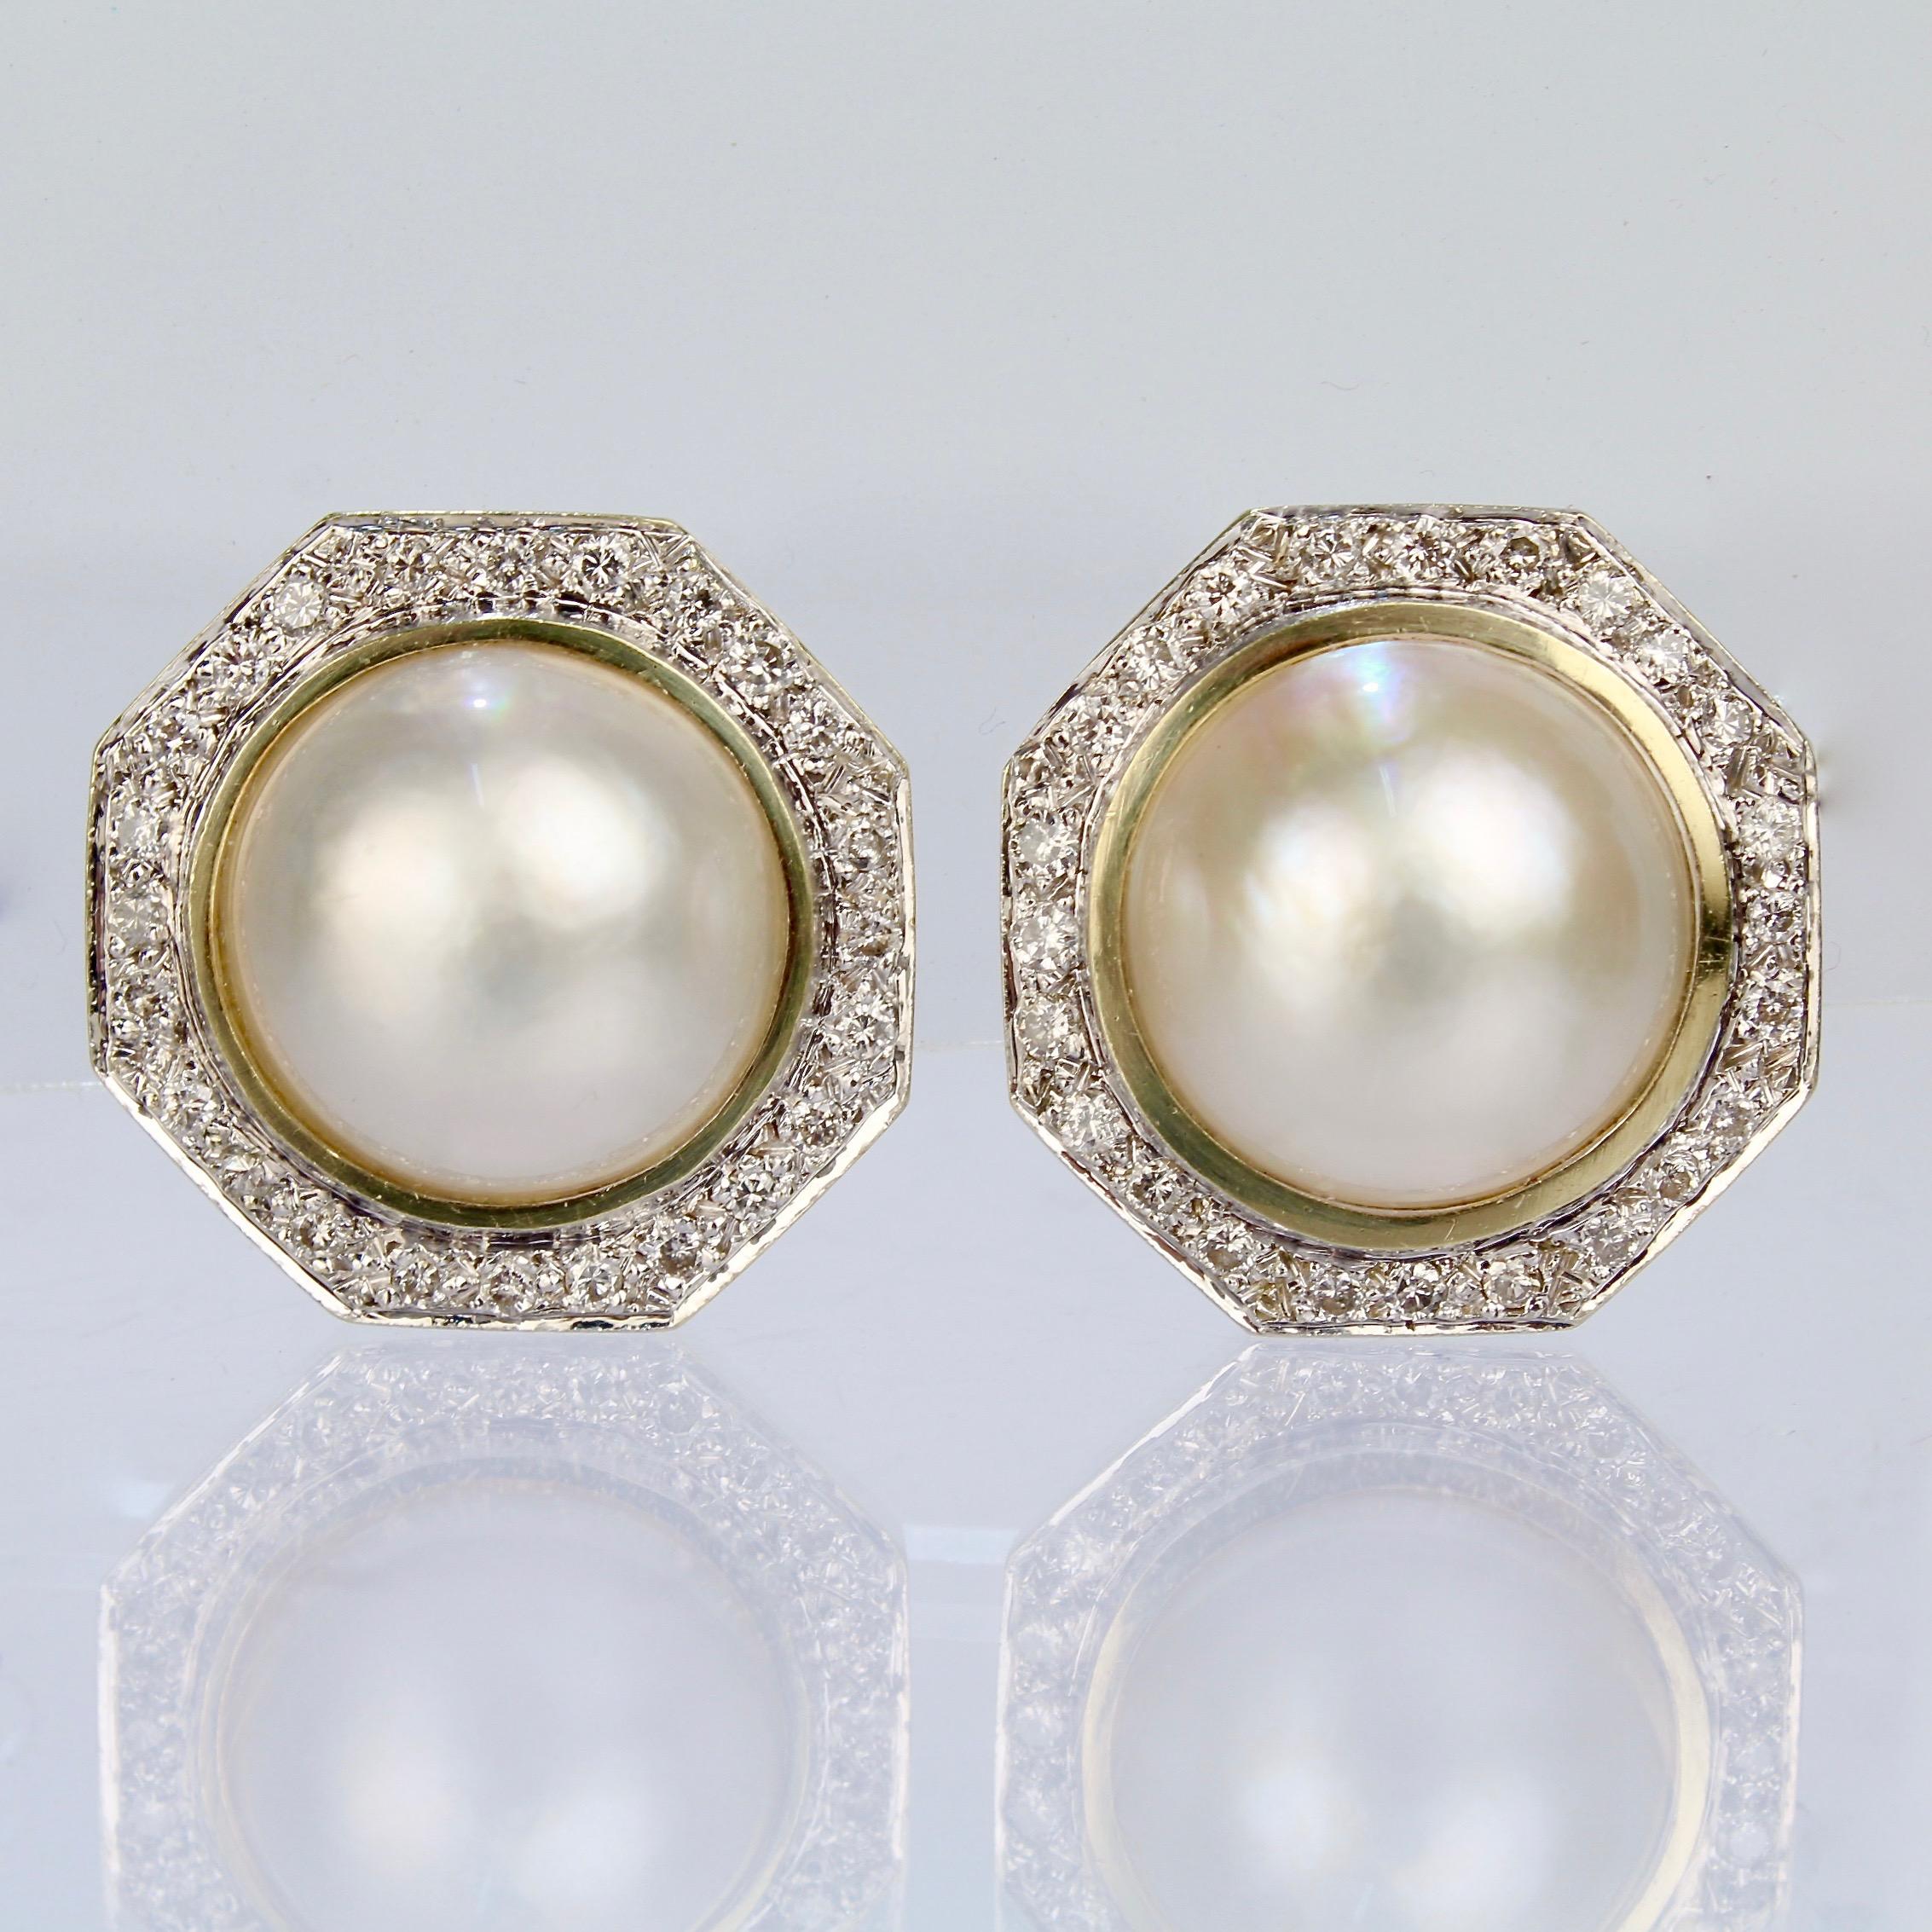 A fine pair of 14K gold, diamond and mabe pearl earrings.

With large mabe pearls center-set in hexagonal settings that are surrounded by a ring of round cut white diamonds.

Mounted with omega clip closures.

Unmarked for gold fineness.